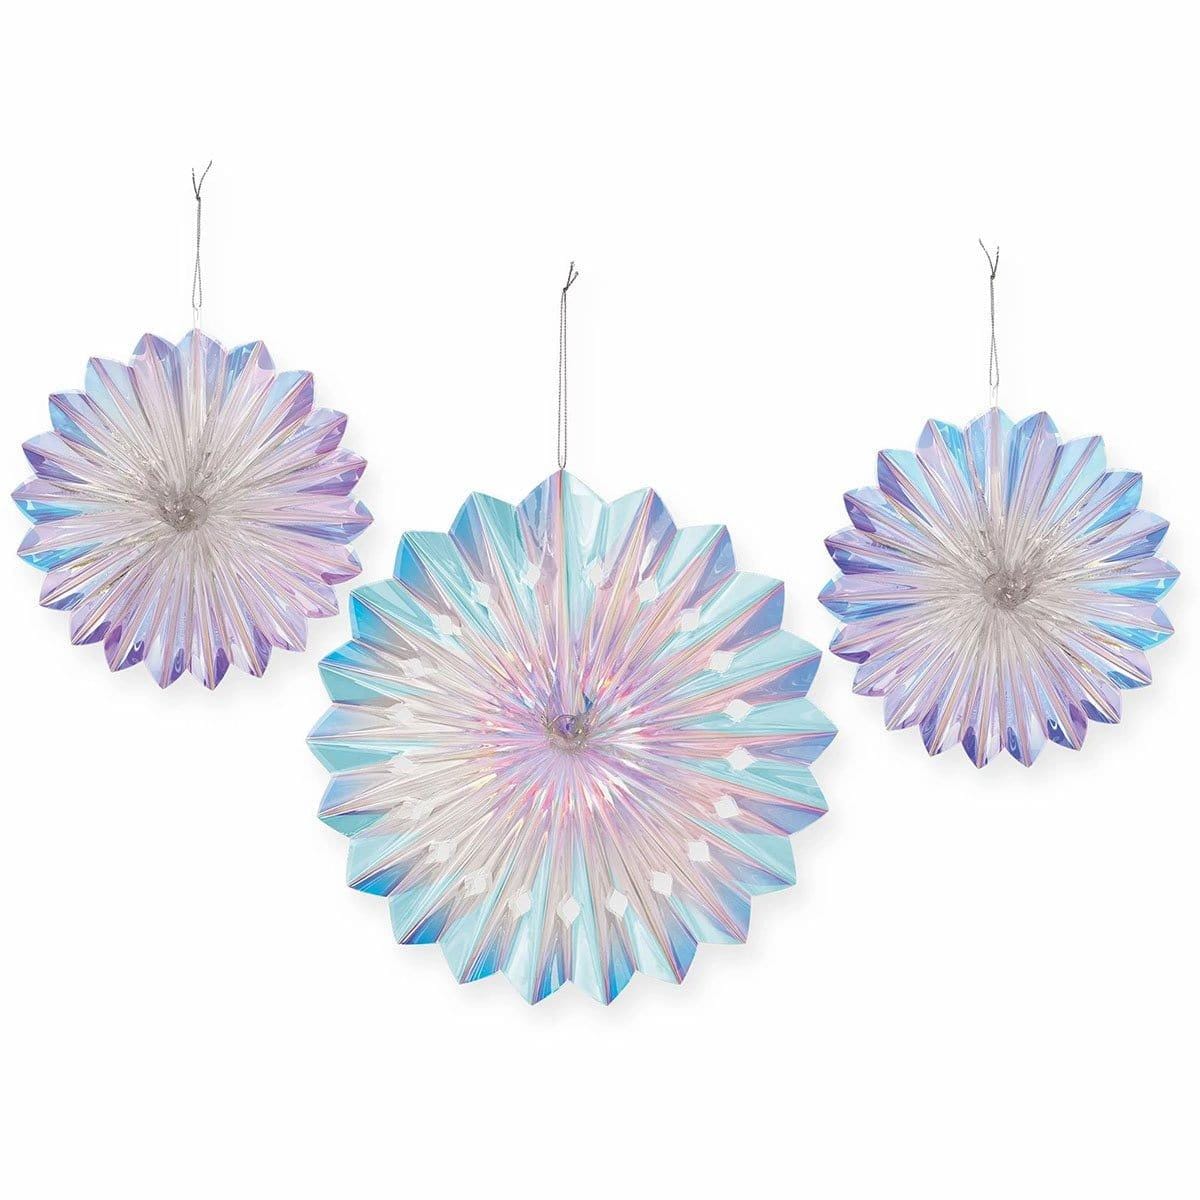 Buy Kids Birthday Mermaid Iridescent Fans, 3 Count sold at Party Expert